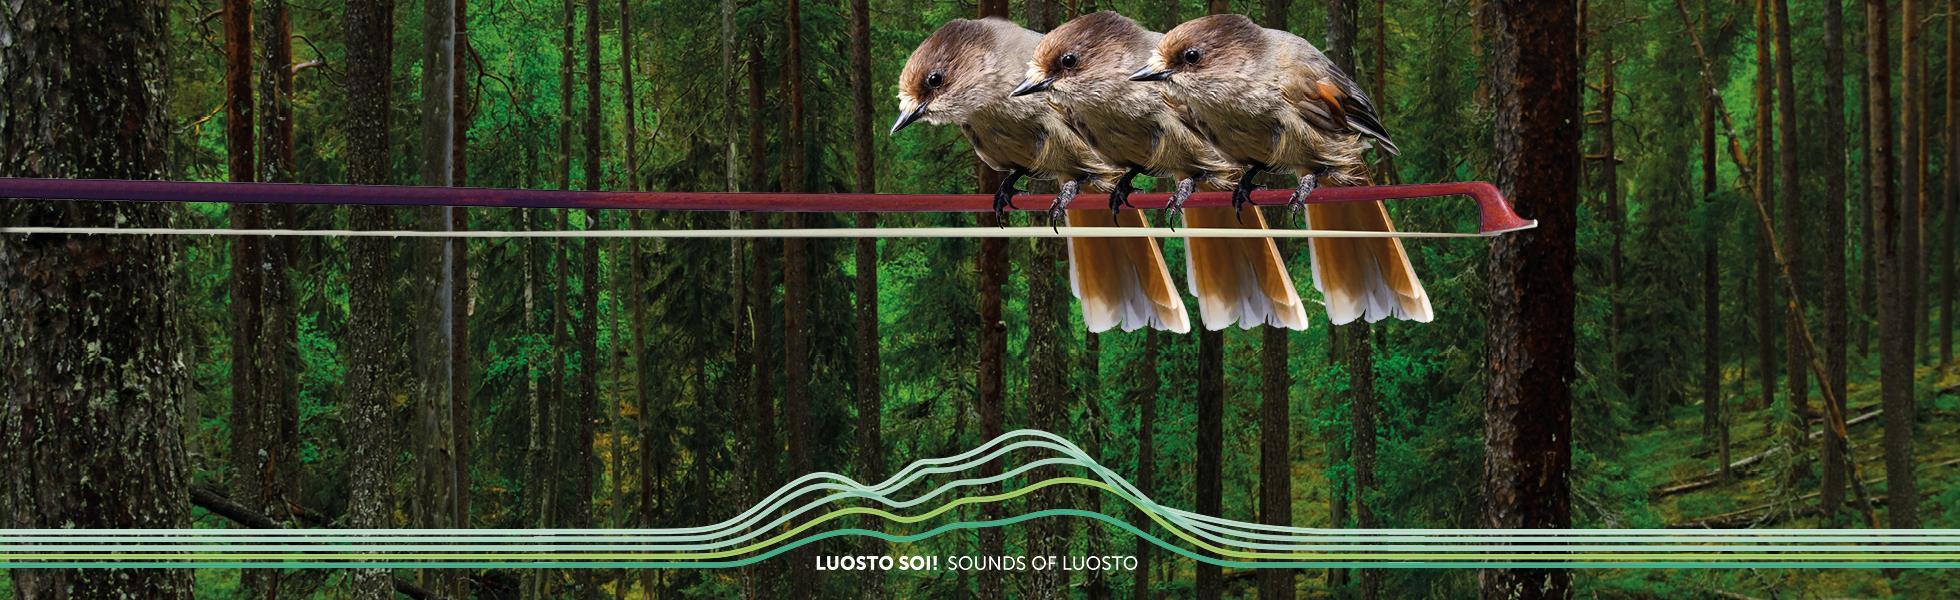 The Sounds of Luosto photography competition